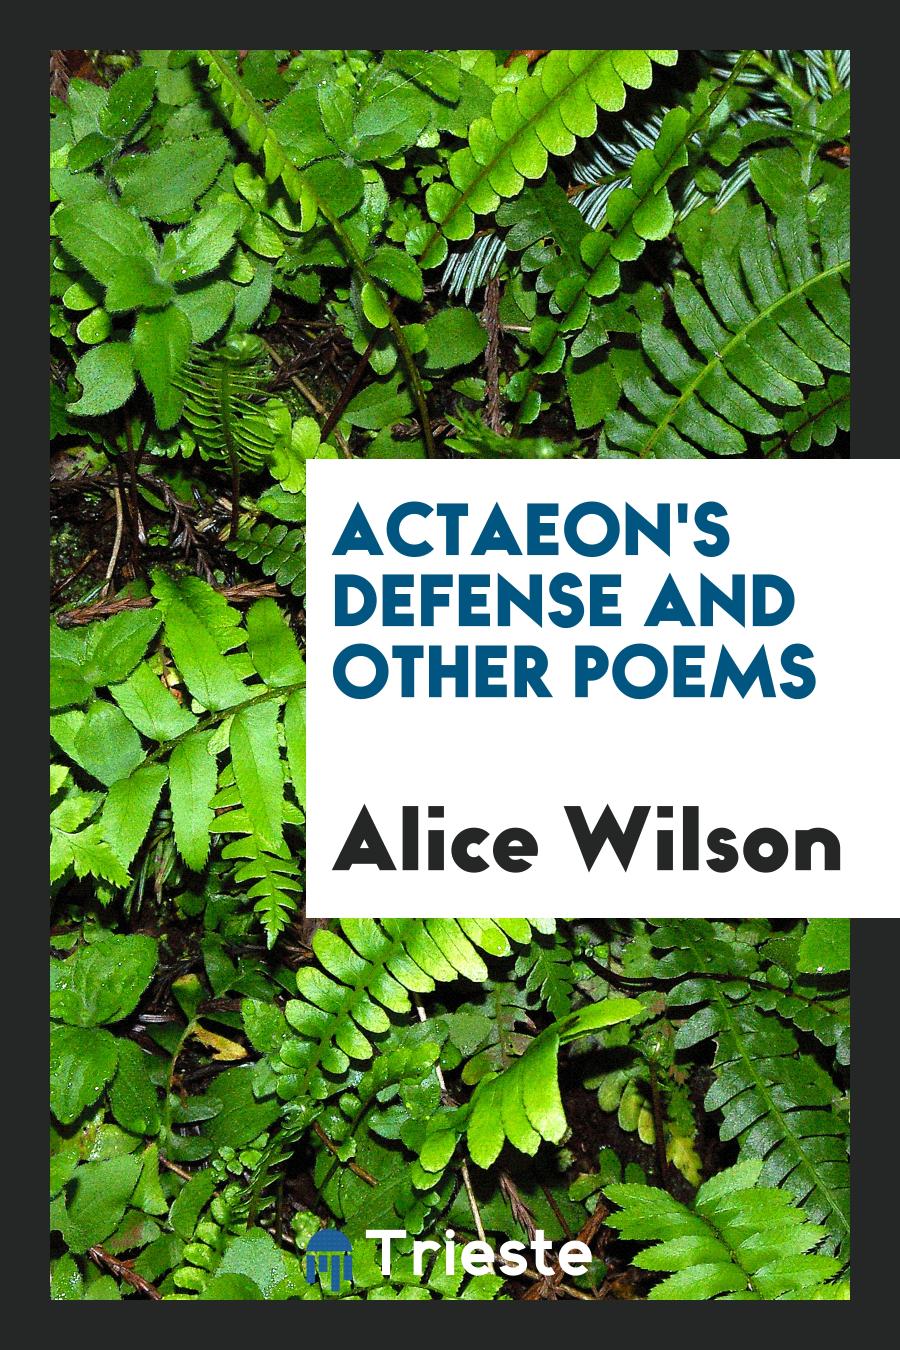 Actaeon's Defense and Other Poems